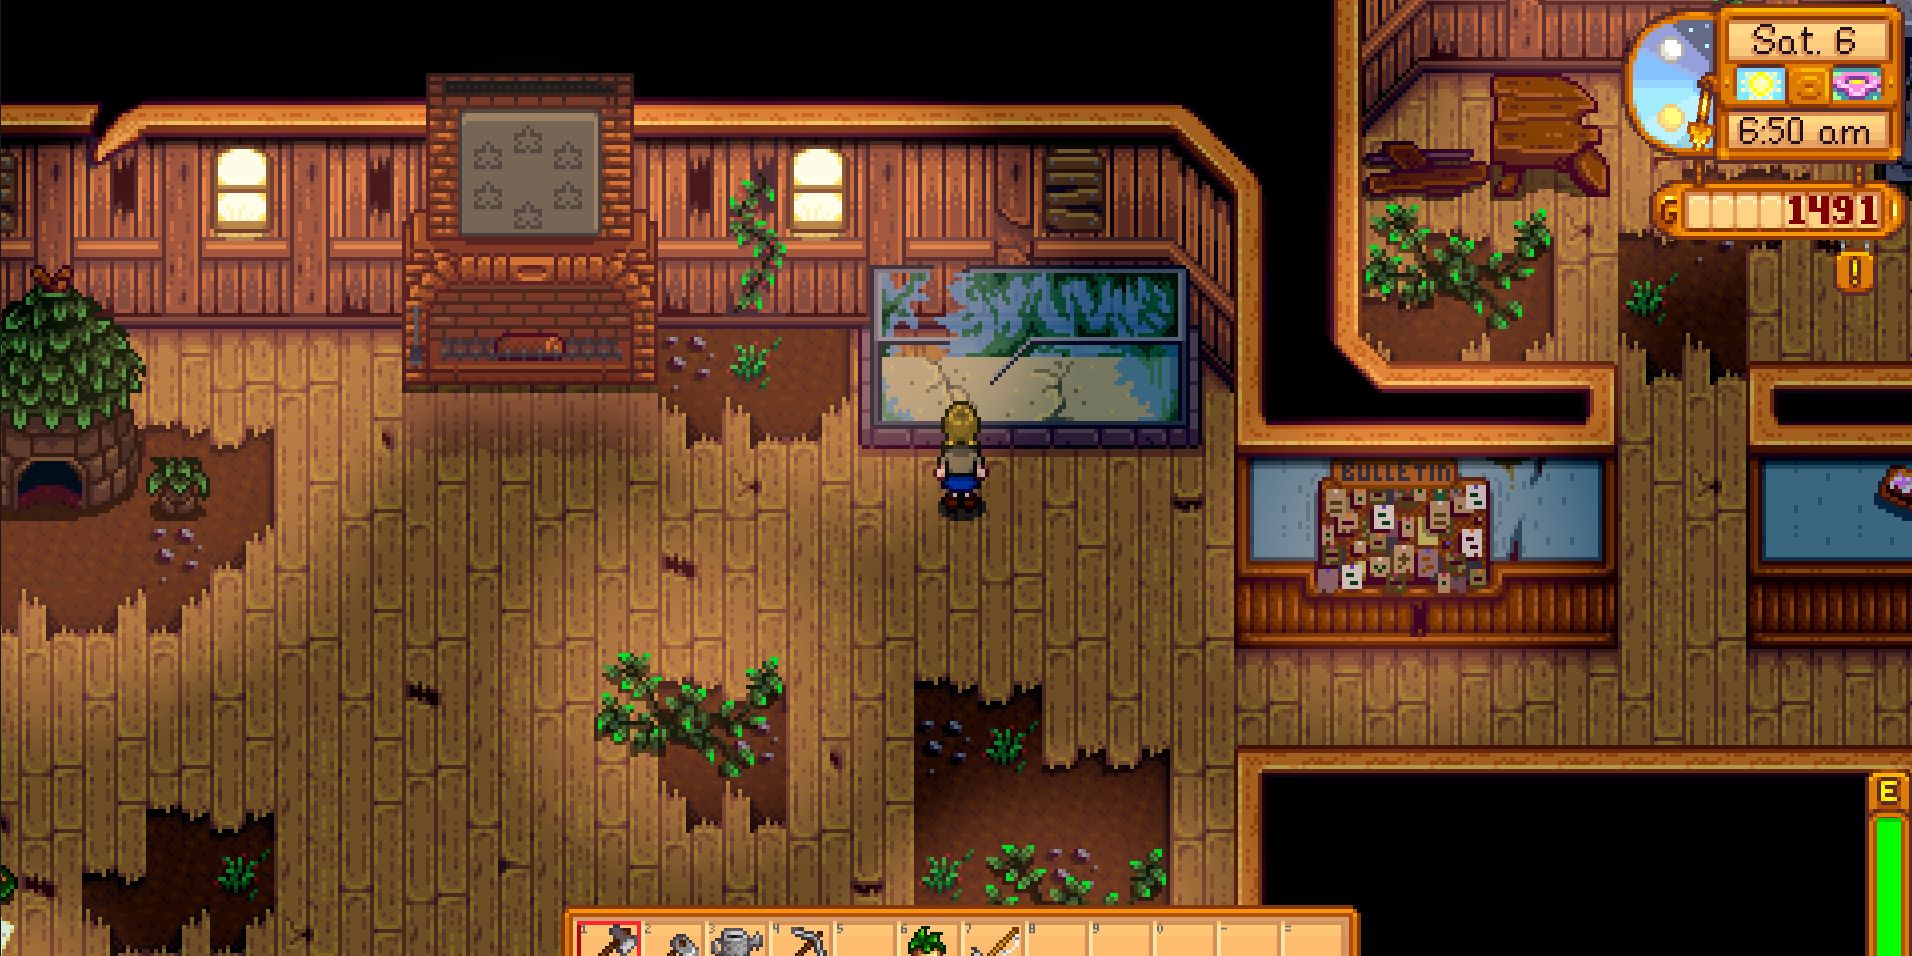 Image of a character standing in front of the fish tank in the Community Center in Stardew Valley